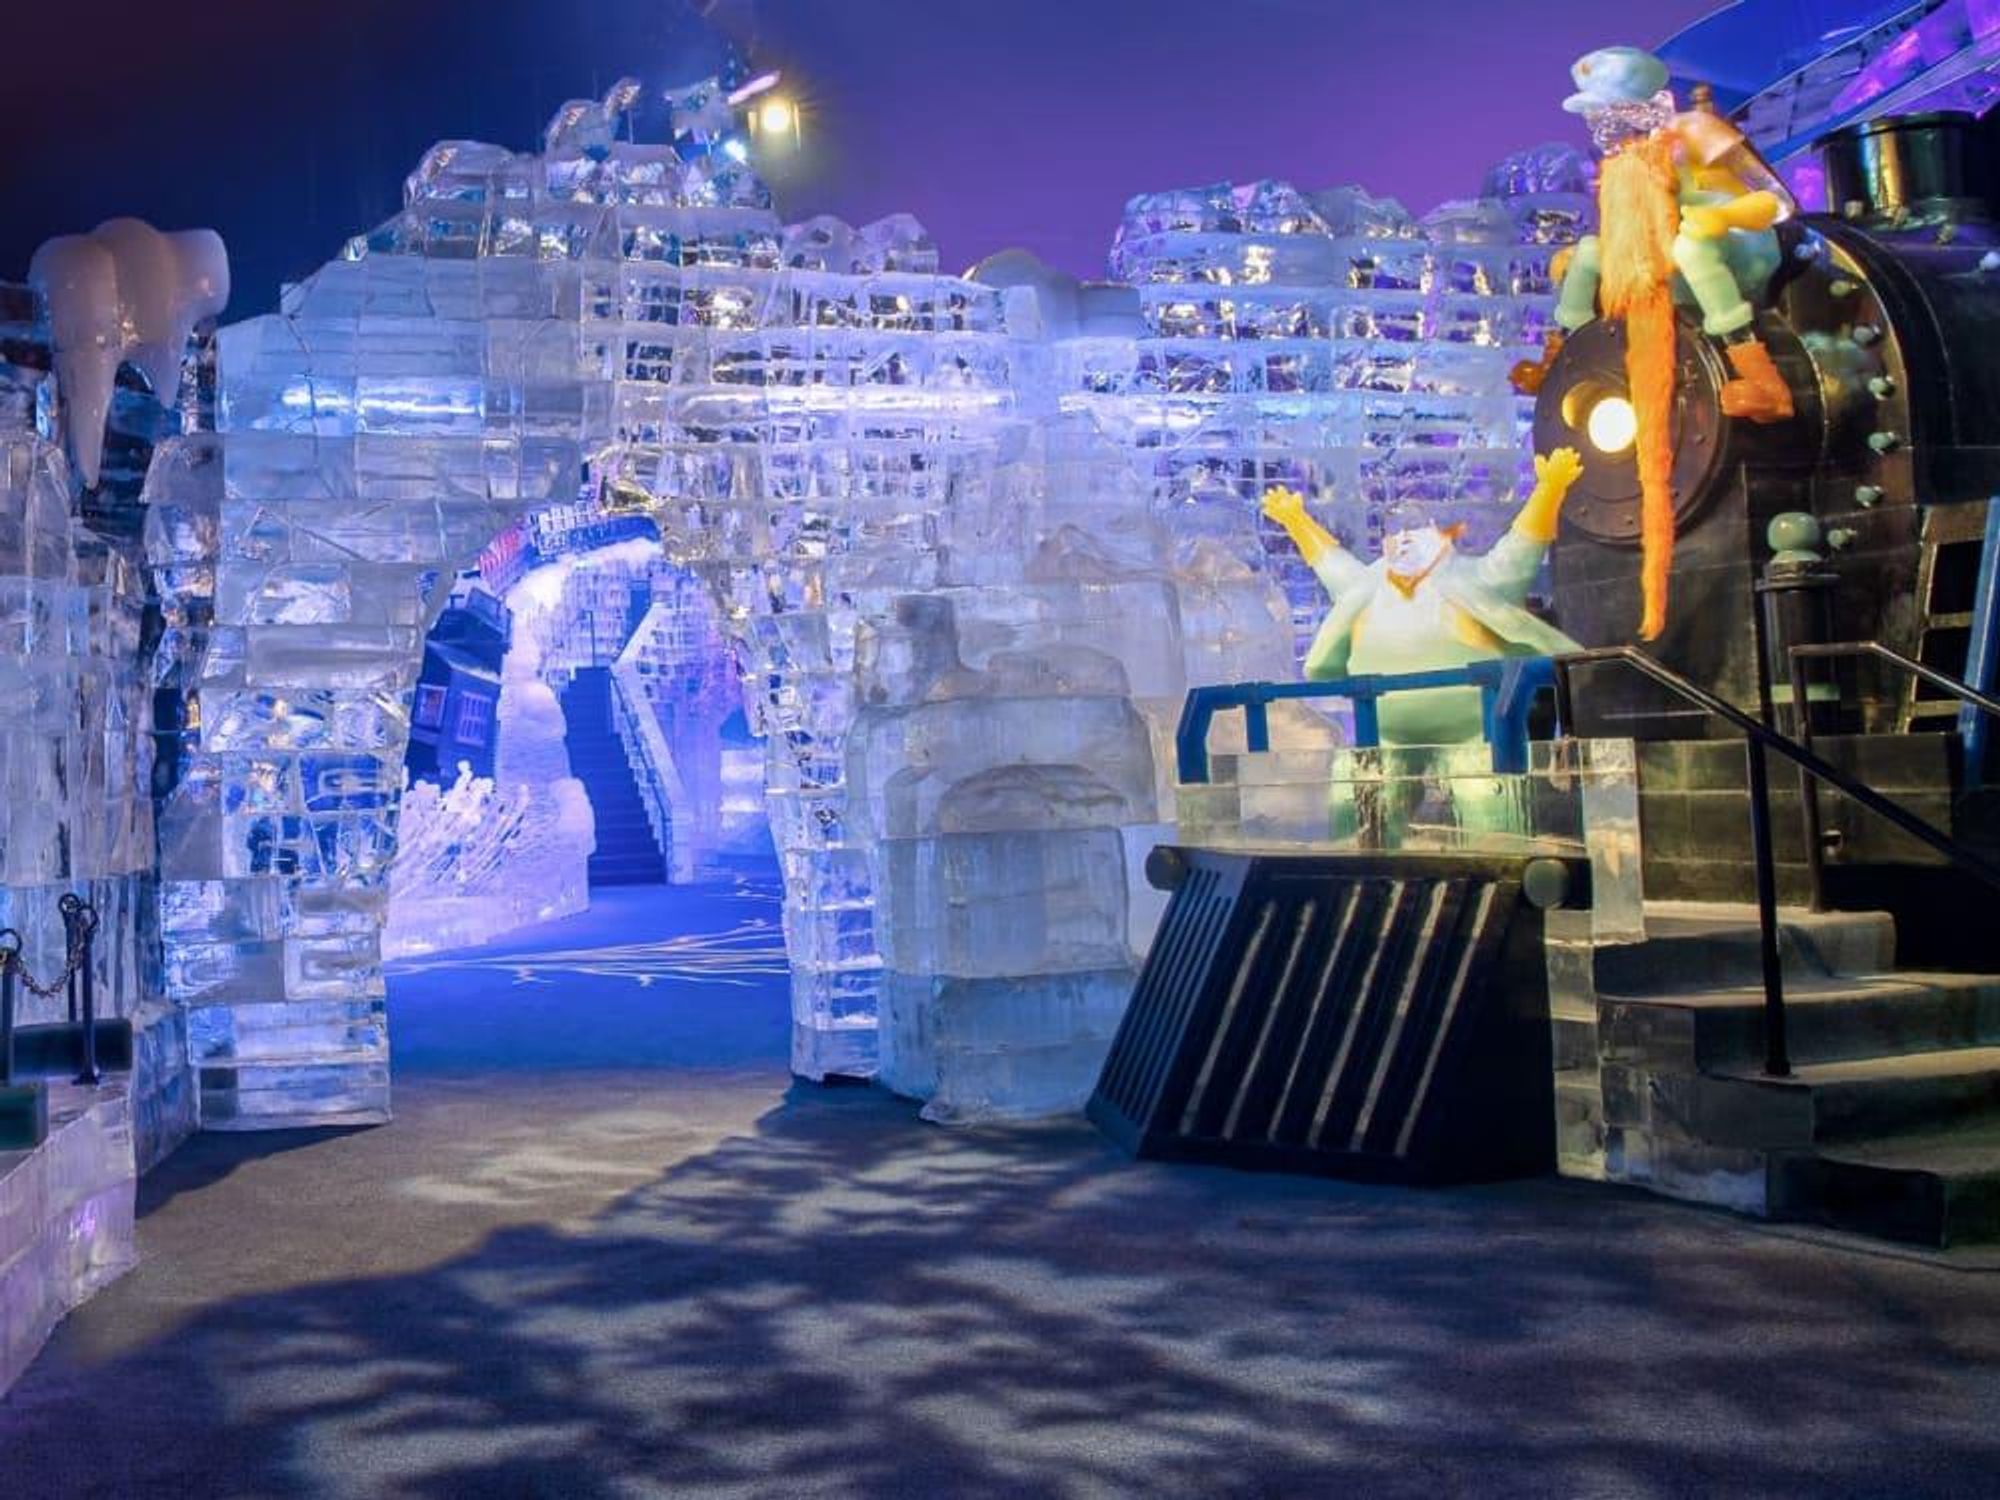 ICE! holiday sensation returns to Gaylord Texan Grapevine after 2year